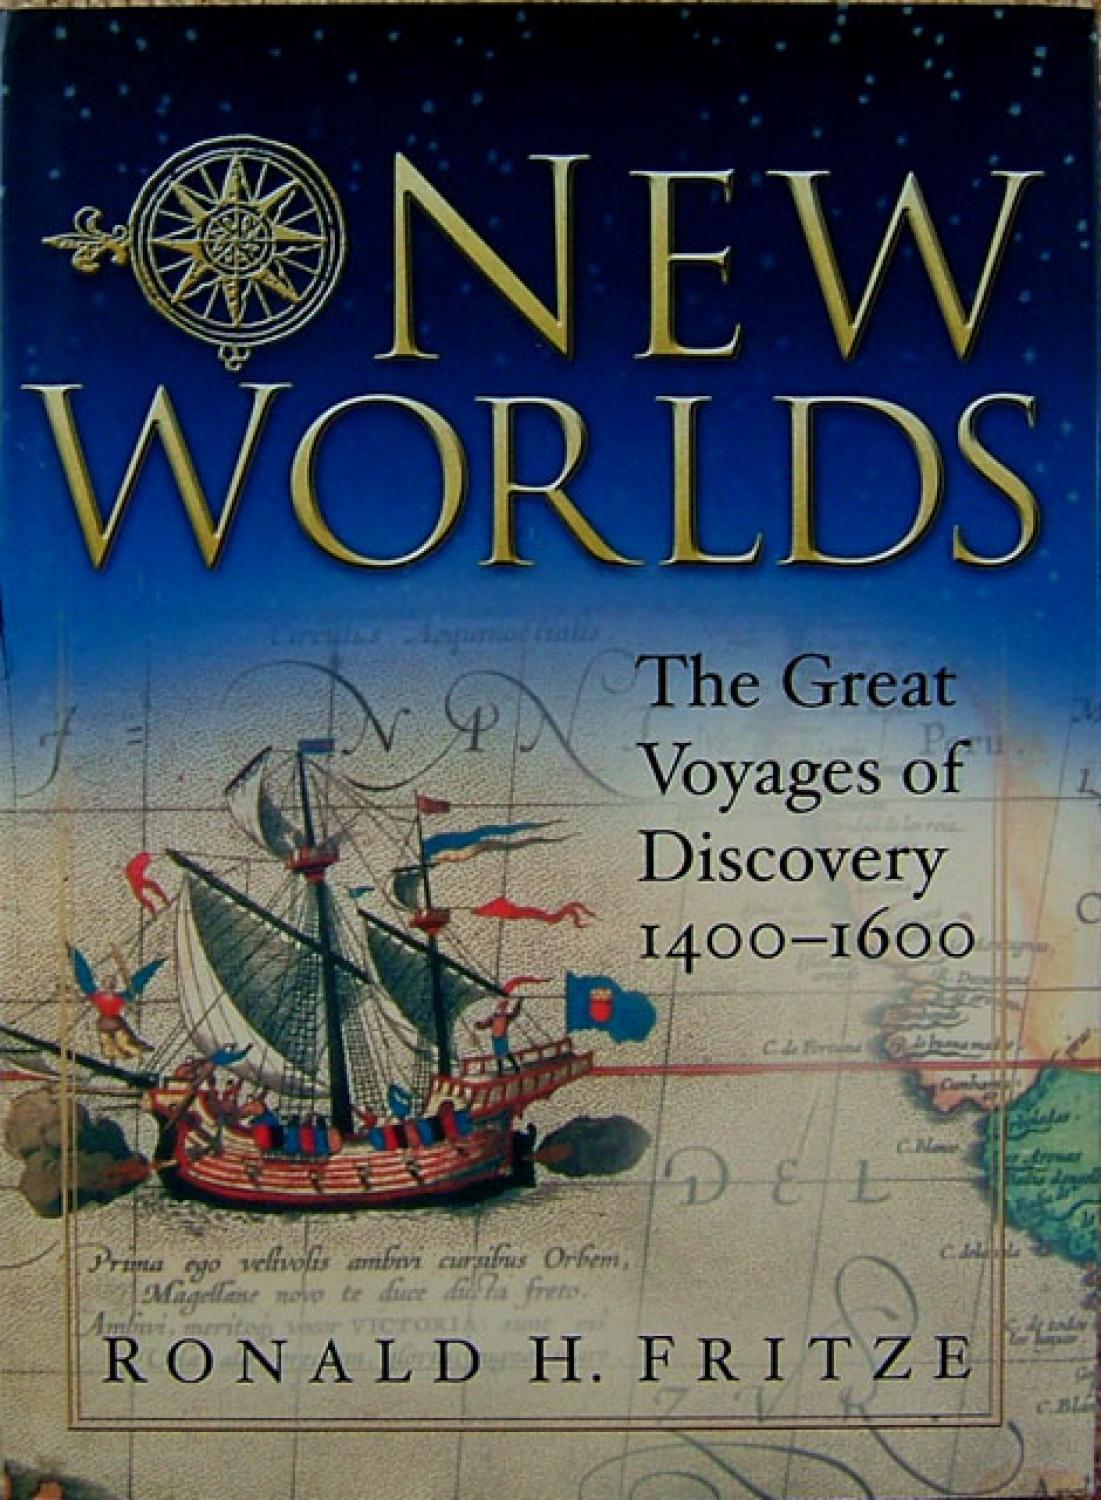 SOLD New Worlds. The Great Voyages of Discovery 1400 - 1600